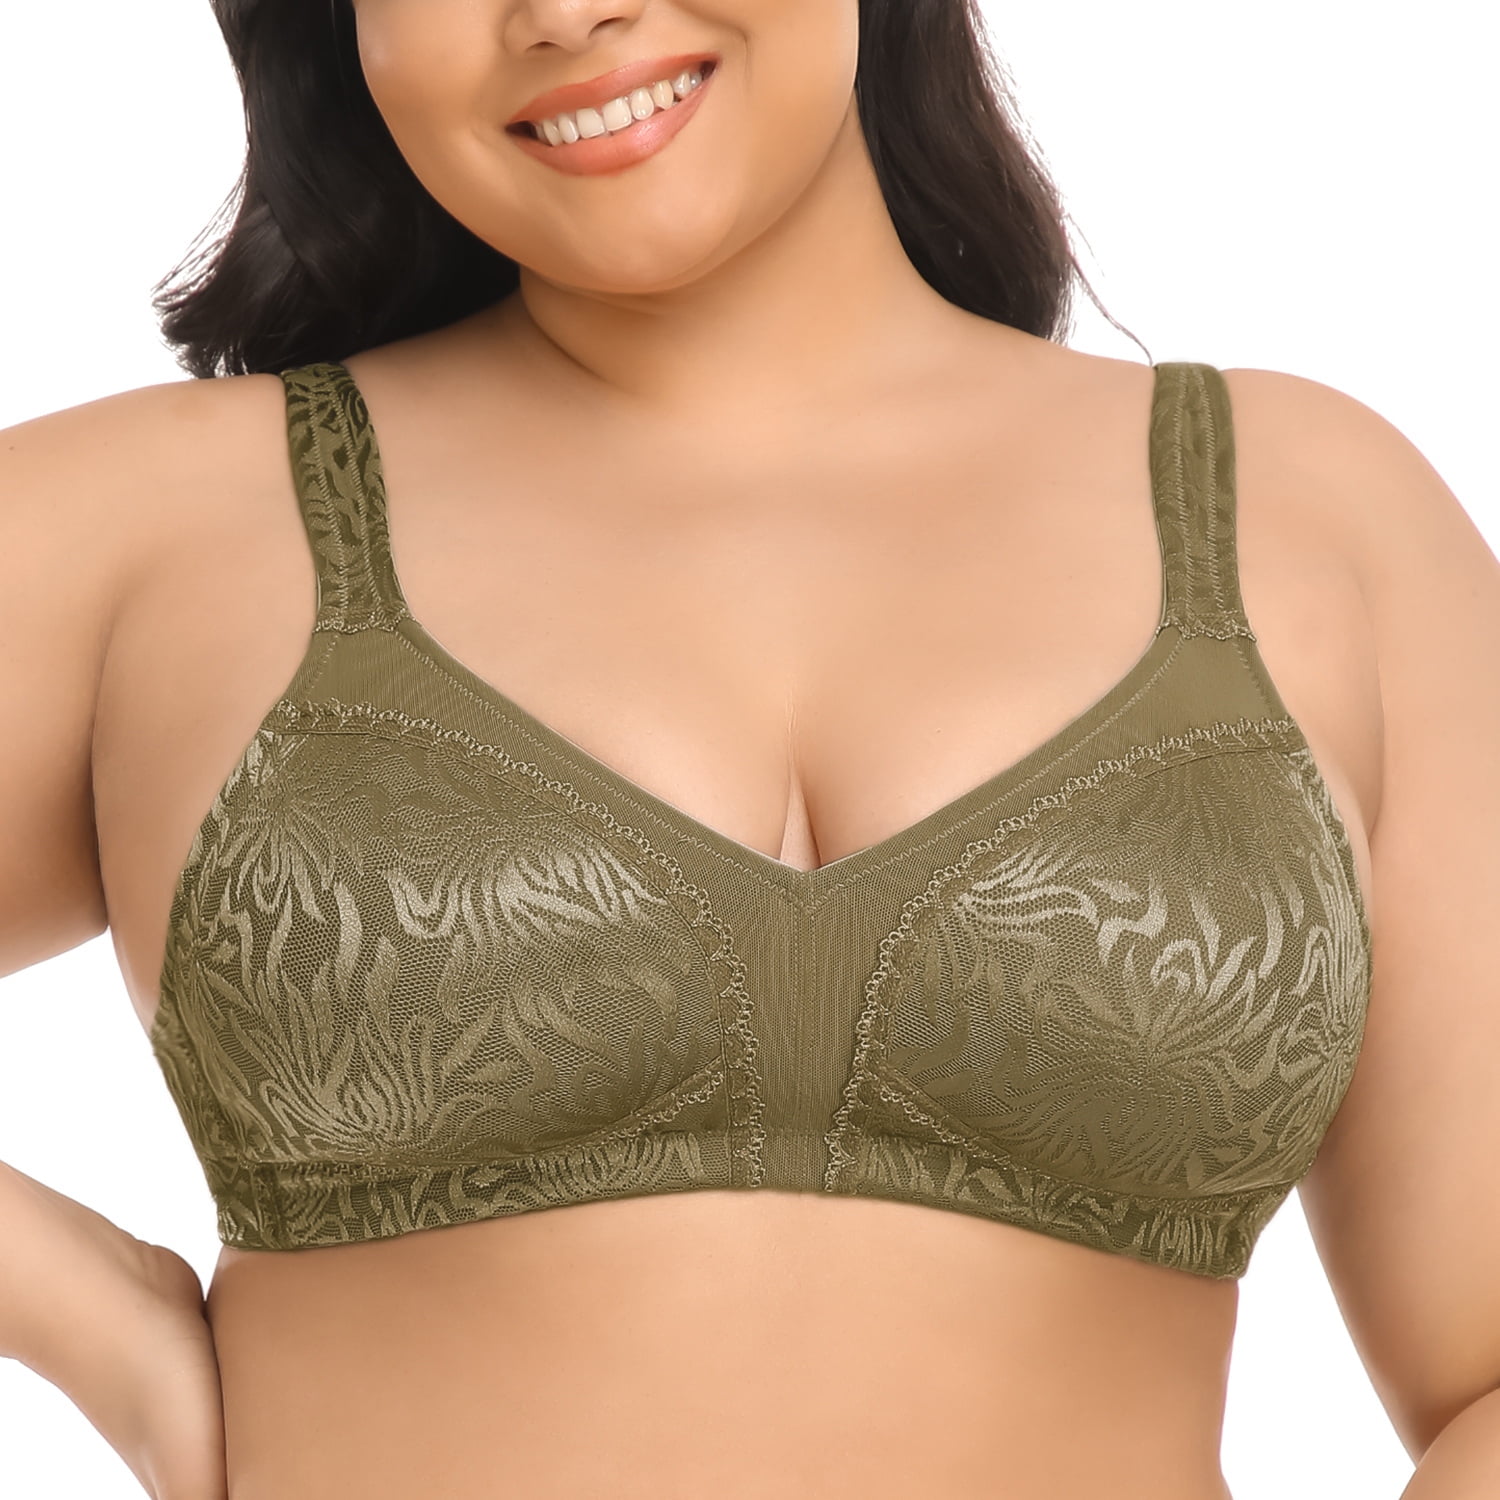 Buy Non-Padded Non-Wired Full Coverage Plus Size Bra in Peach